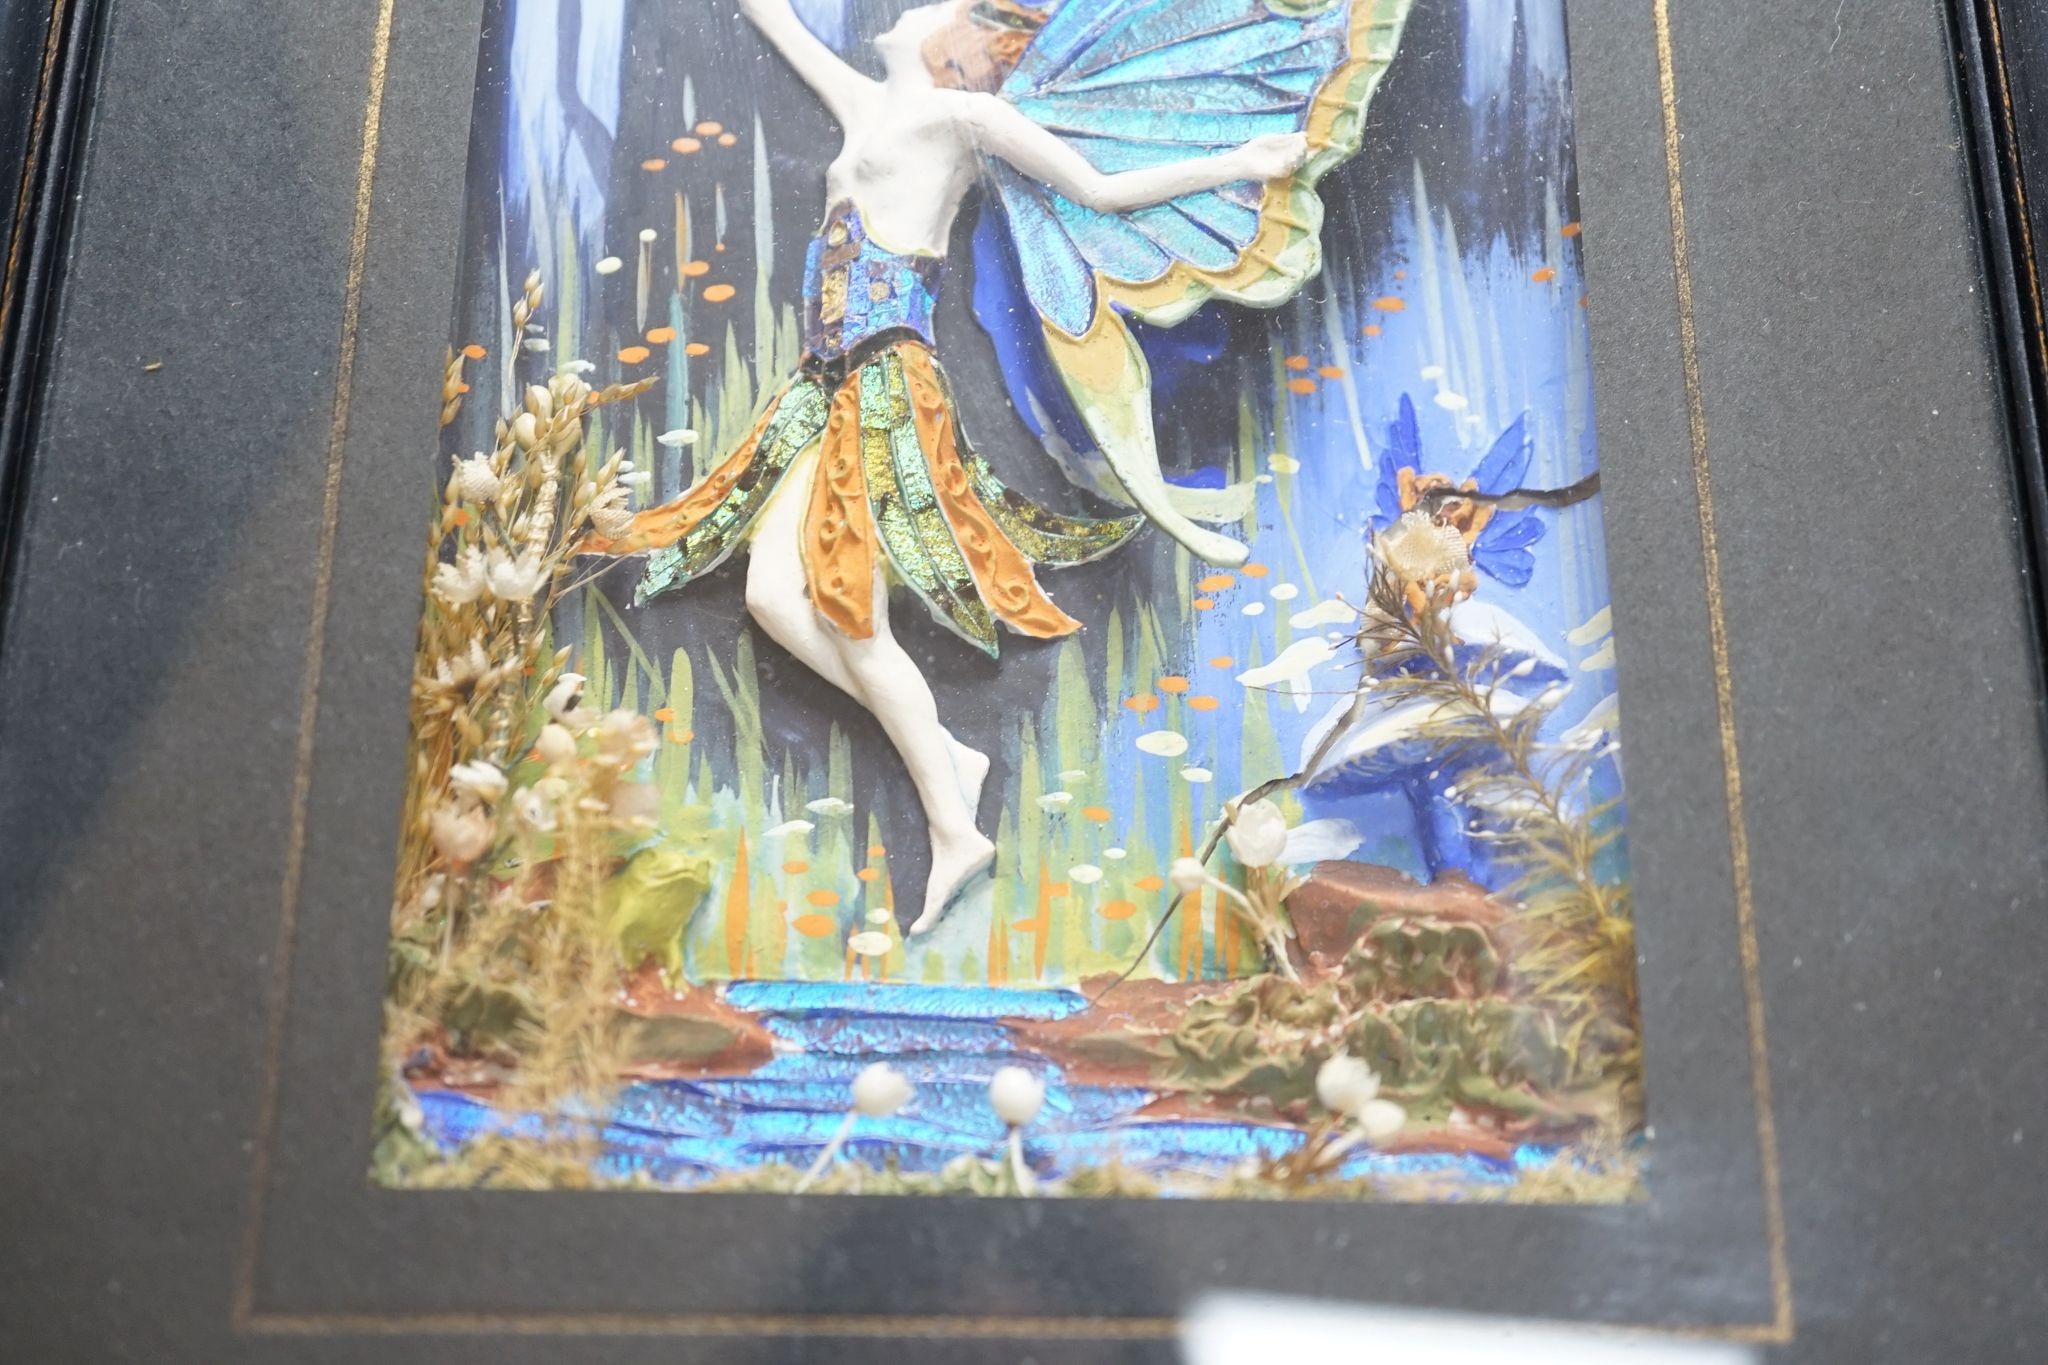 A pair of morpho butterfly wing nymph diorama, signed Gaydon King, Pat. App. For 19907/29, c. - Image 3 of 7